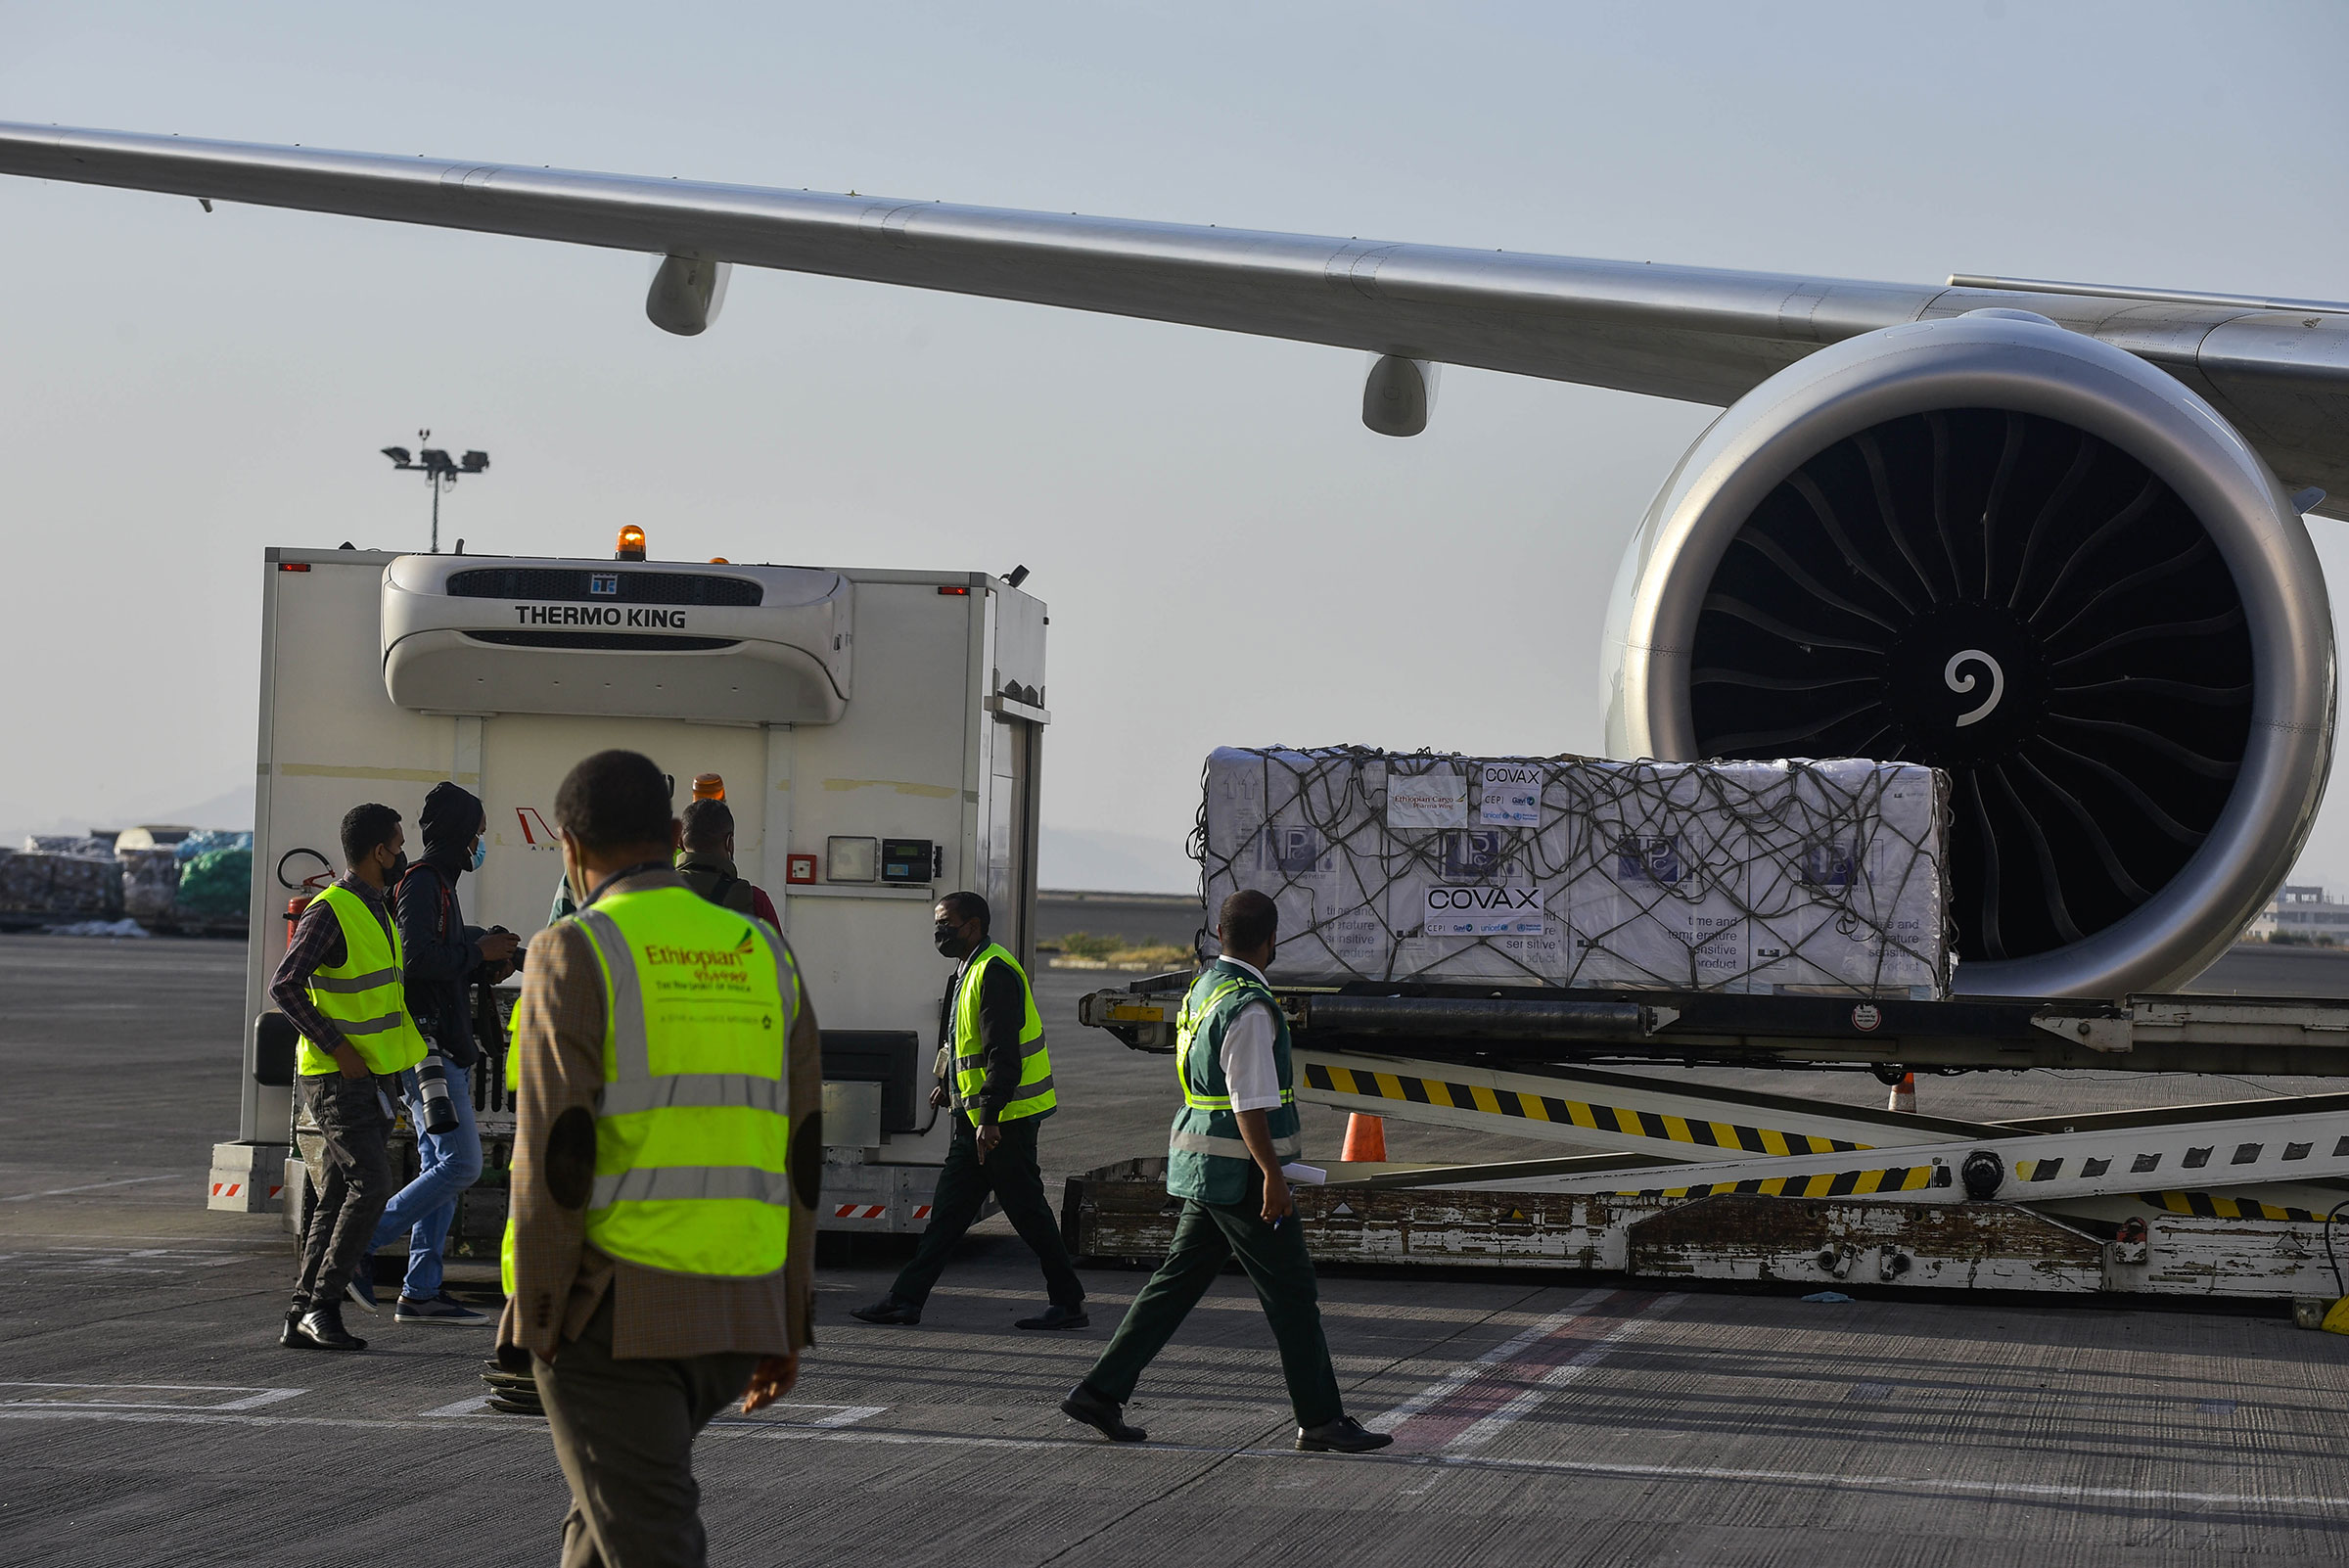 COVID-19 vaccines from COVAX arrive at Bole international airport in Addis Ababa, Ethiopia, on March 7, 2021. (Michael Tewelde—Xinhua/Sipa)